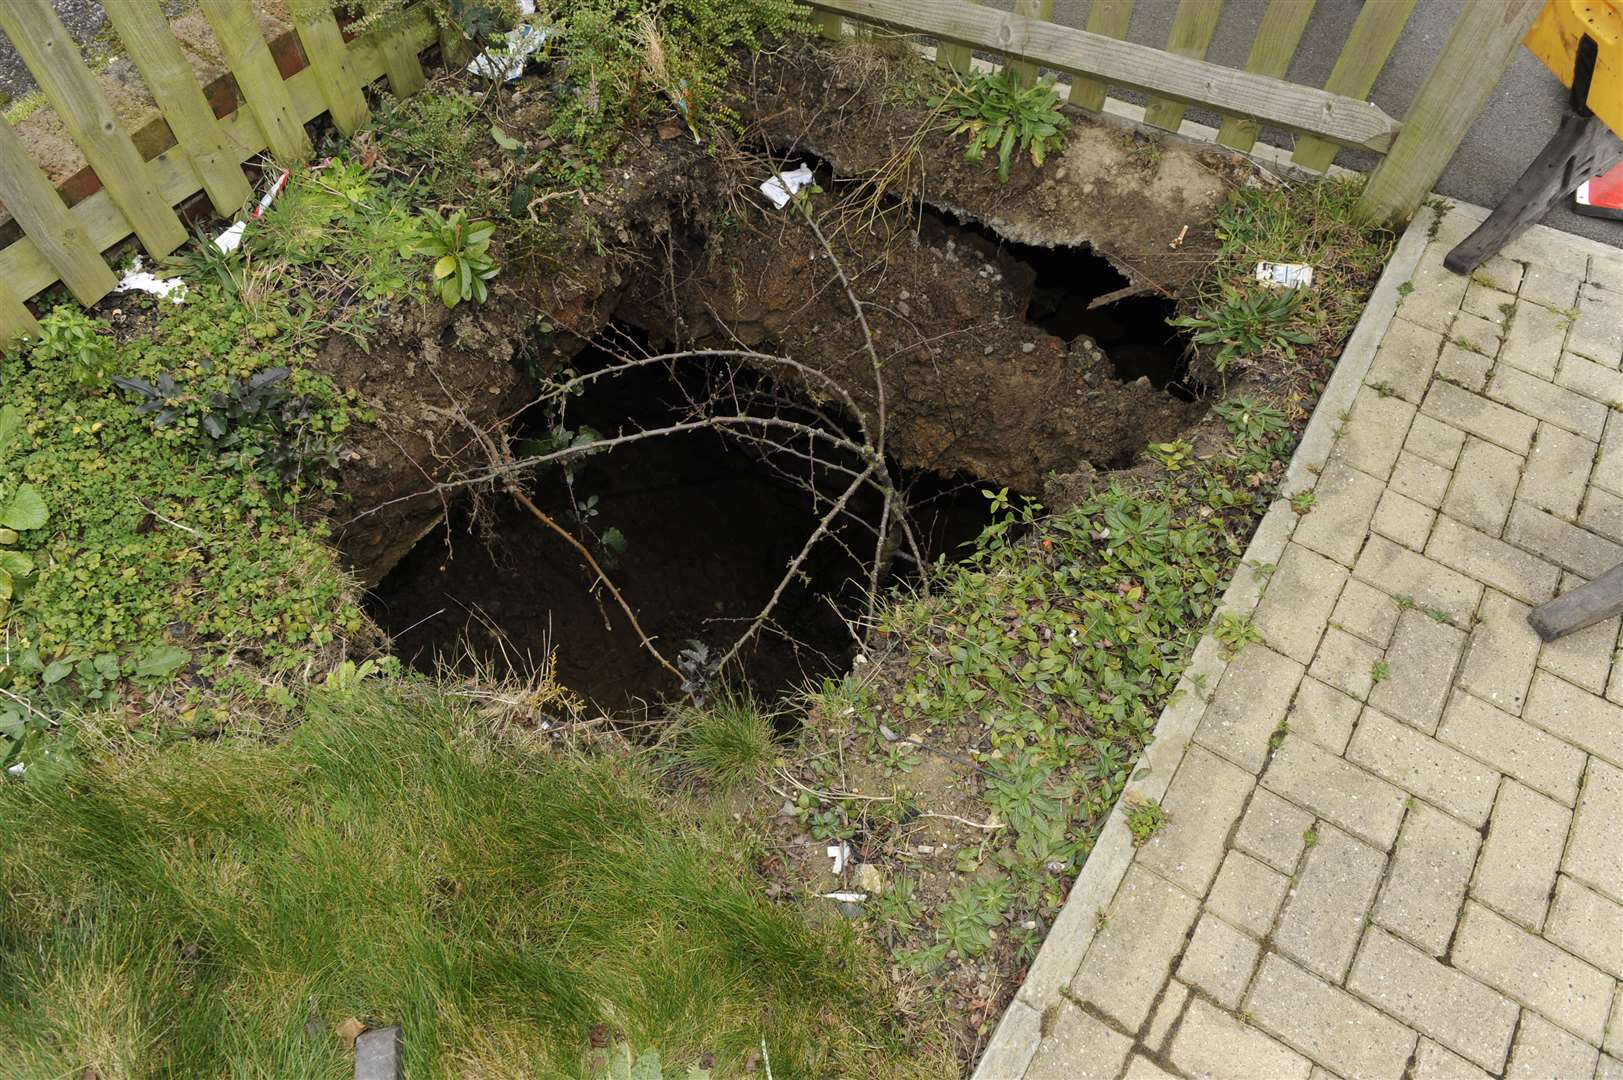 The sink hole